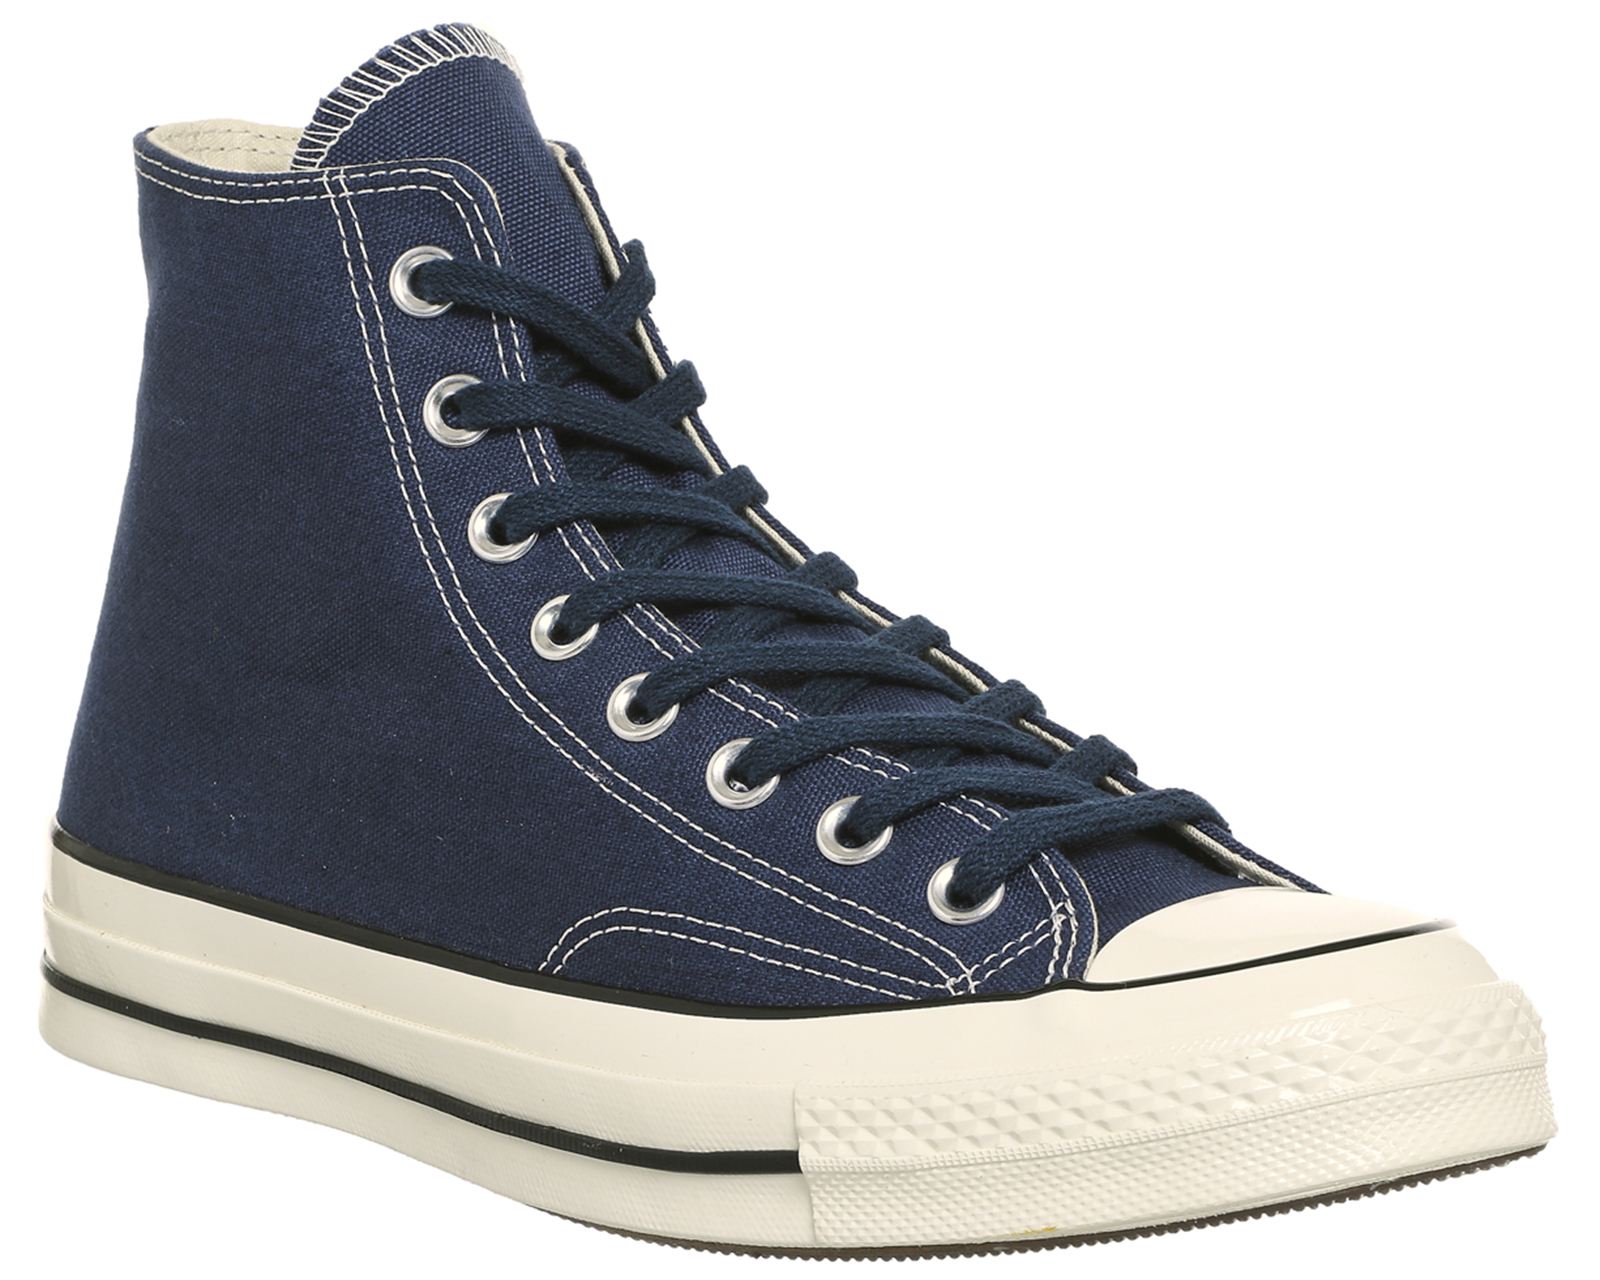 Converse All Star Hi 70s Trainers Midnight Navy - His trainers